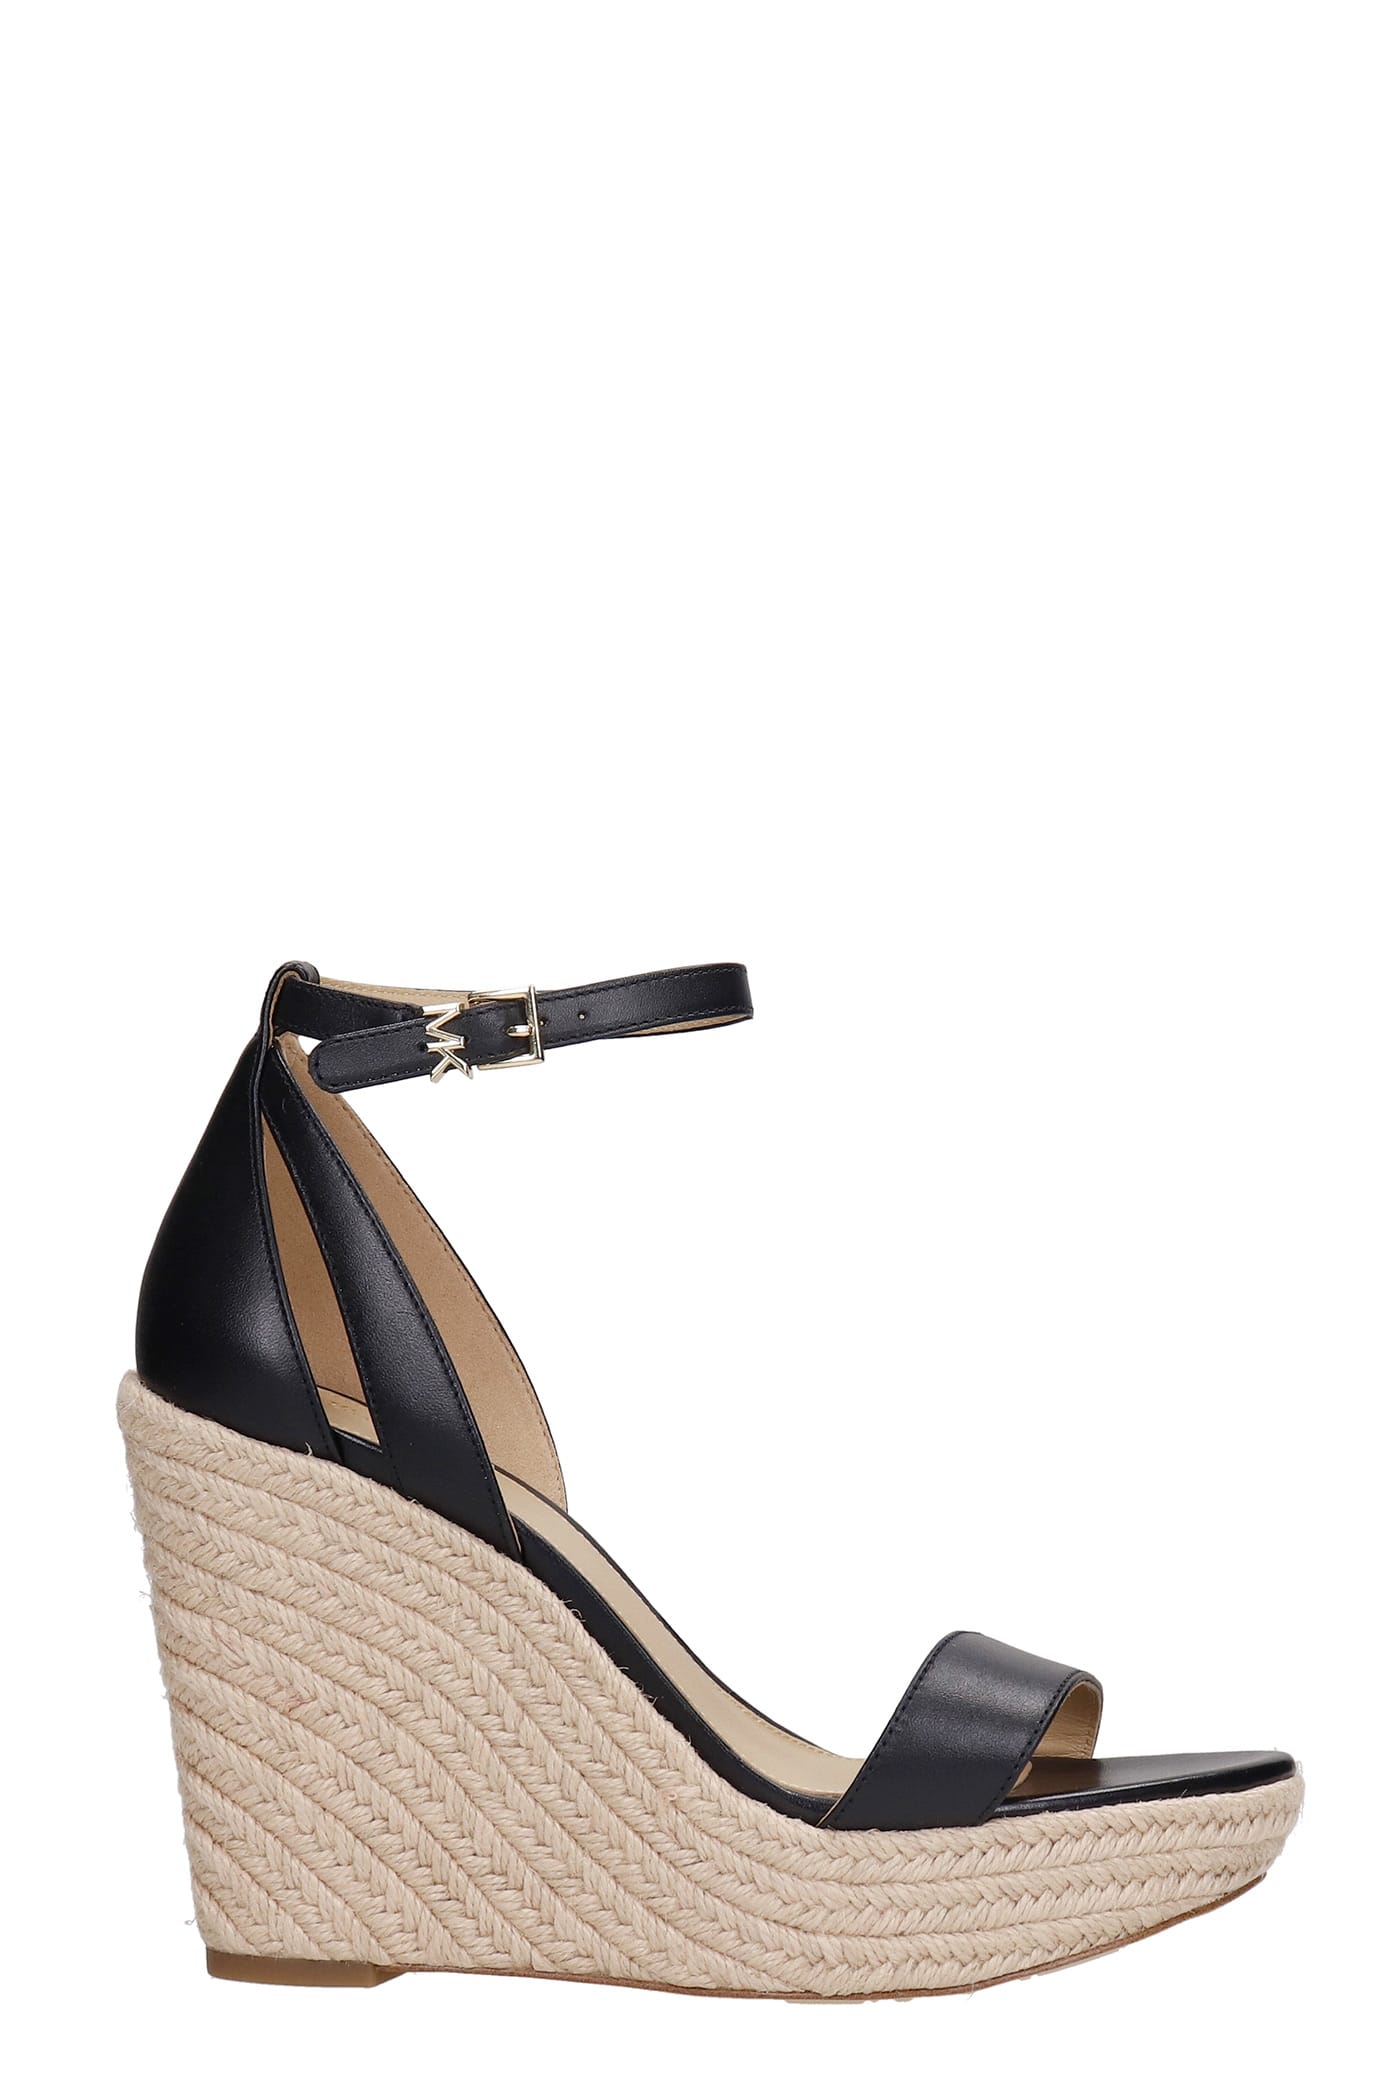 MICHAEL Michael Kors Kimberly Wedges In Black Leather